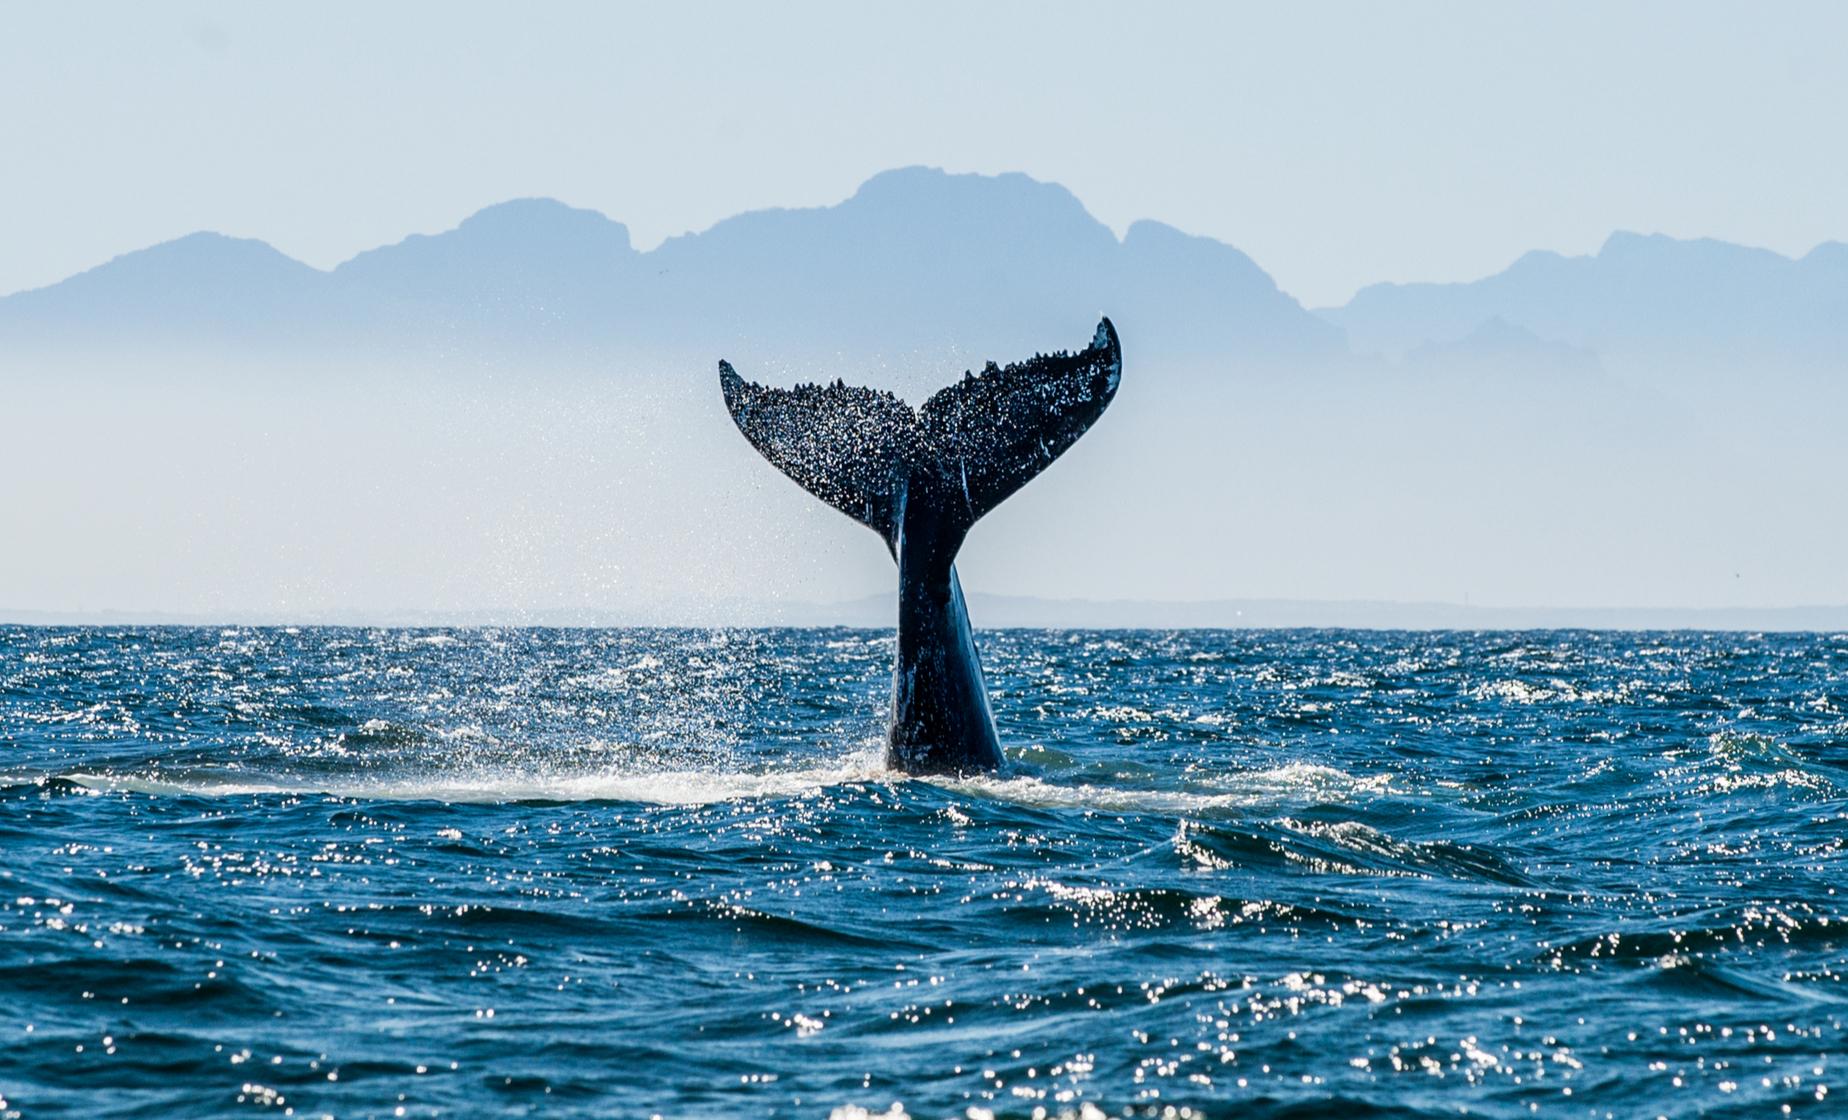 Vancouver's Half-Day Whale Watching